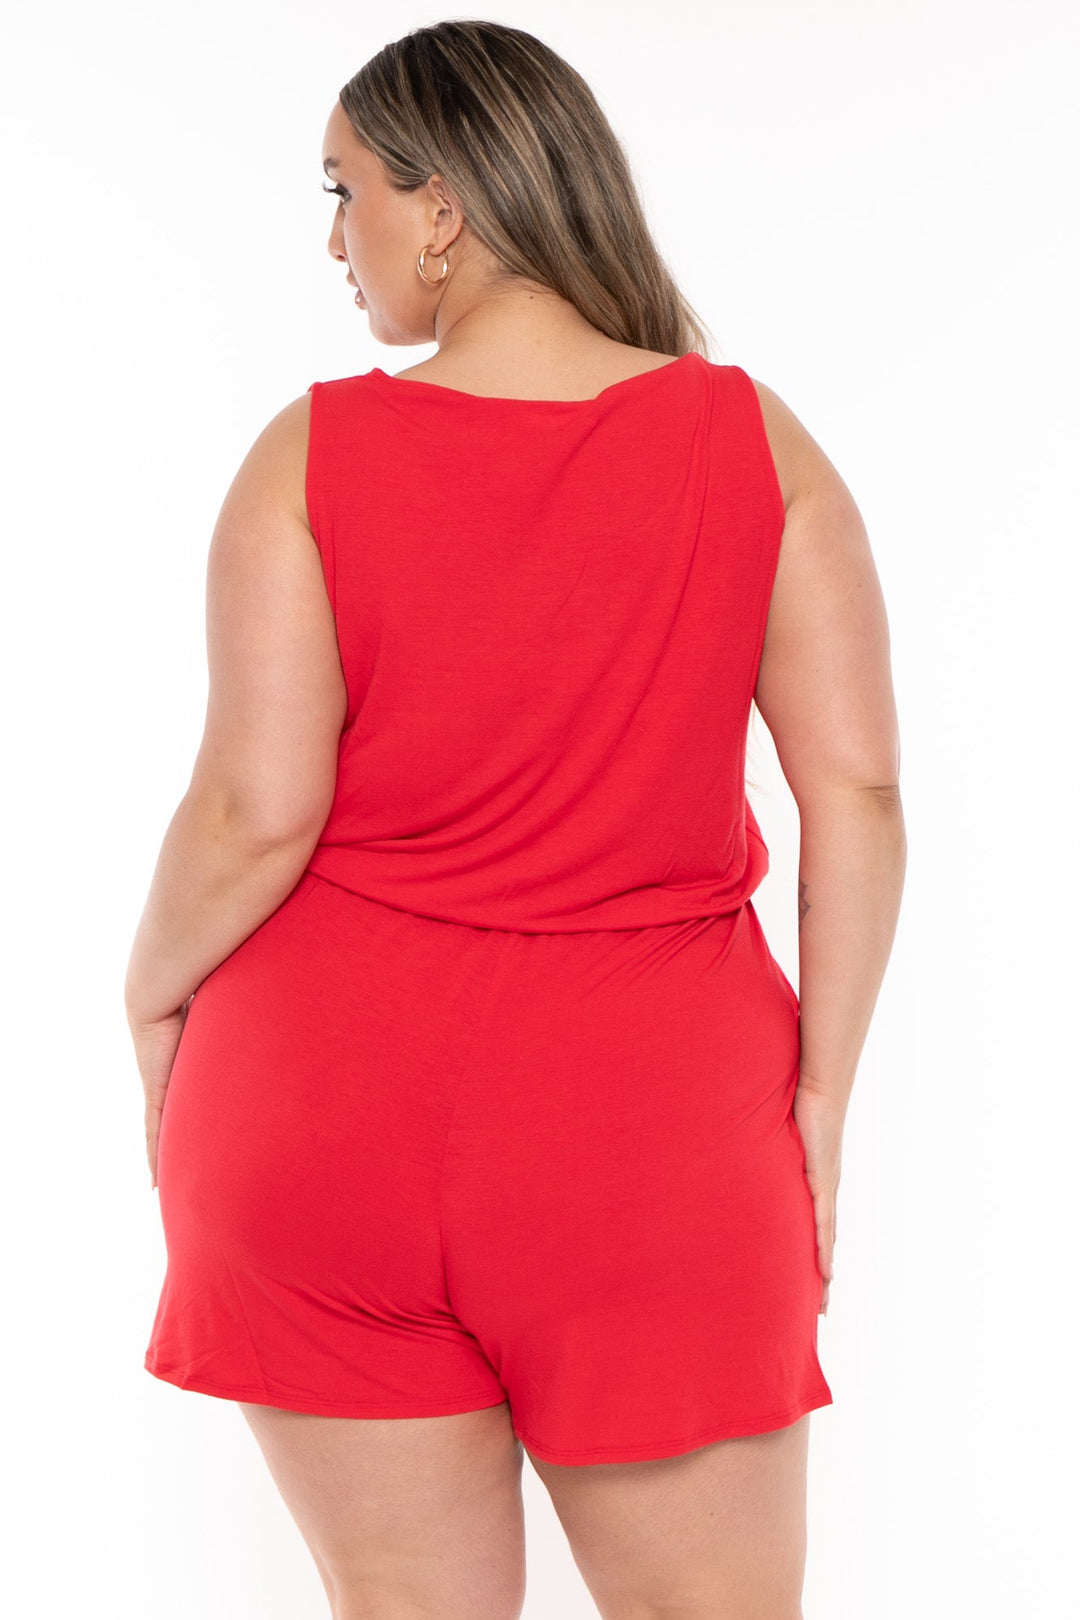 Zenana Jumpsuits and Rompers Plus Size Zenny Sleeveless  Romper - Red